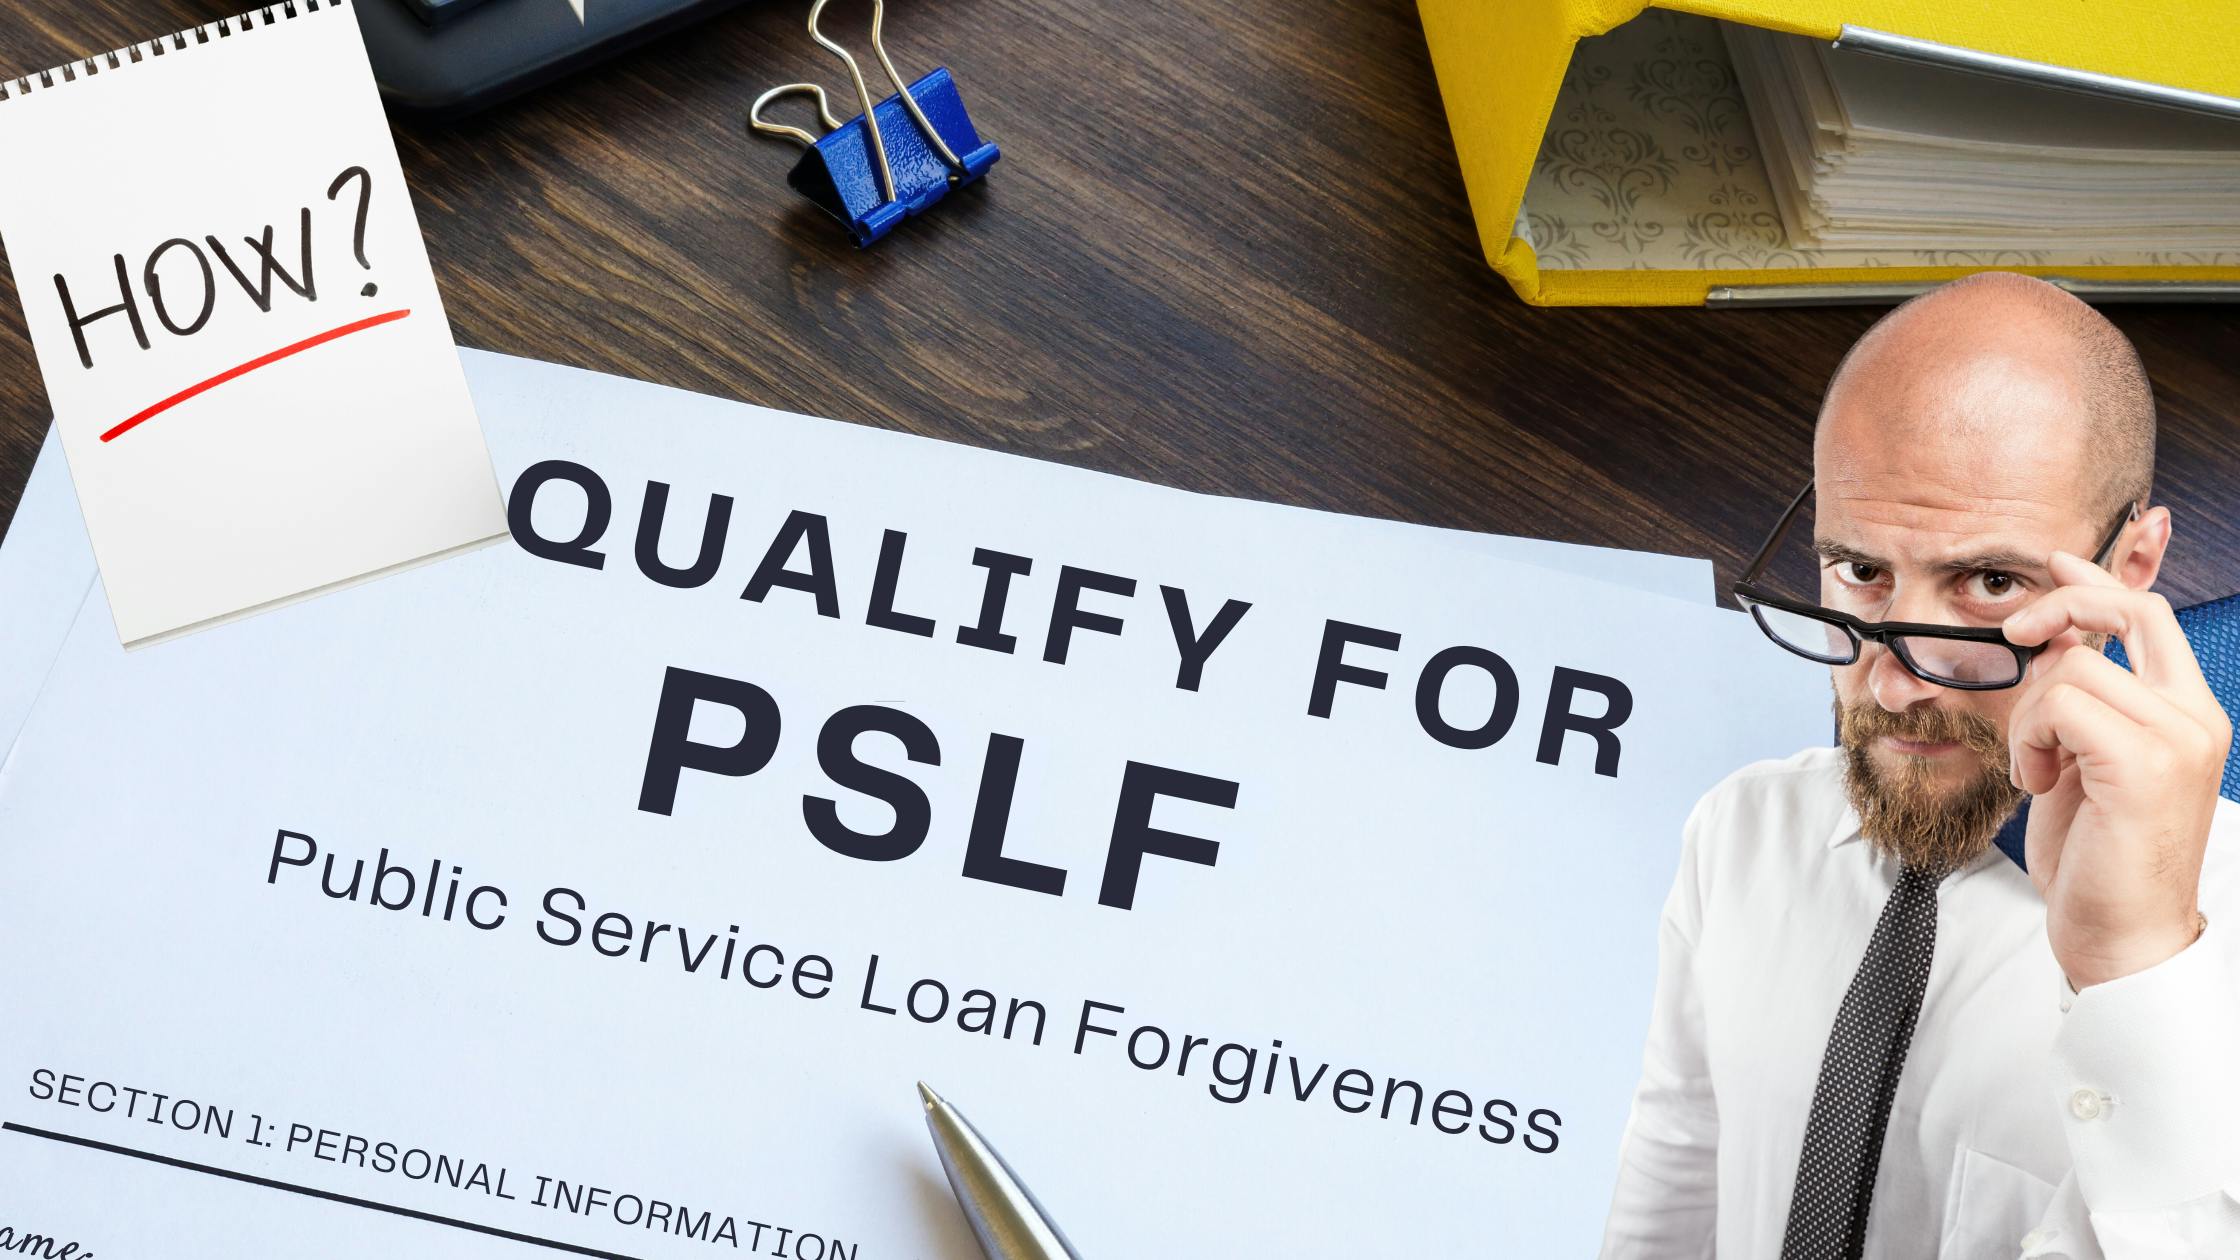 Understanding Pubic Service Loan Forgiveness: How can you qualify?